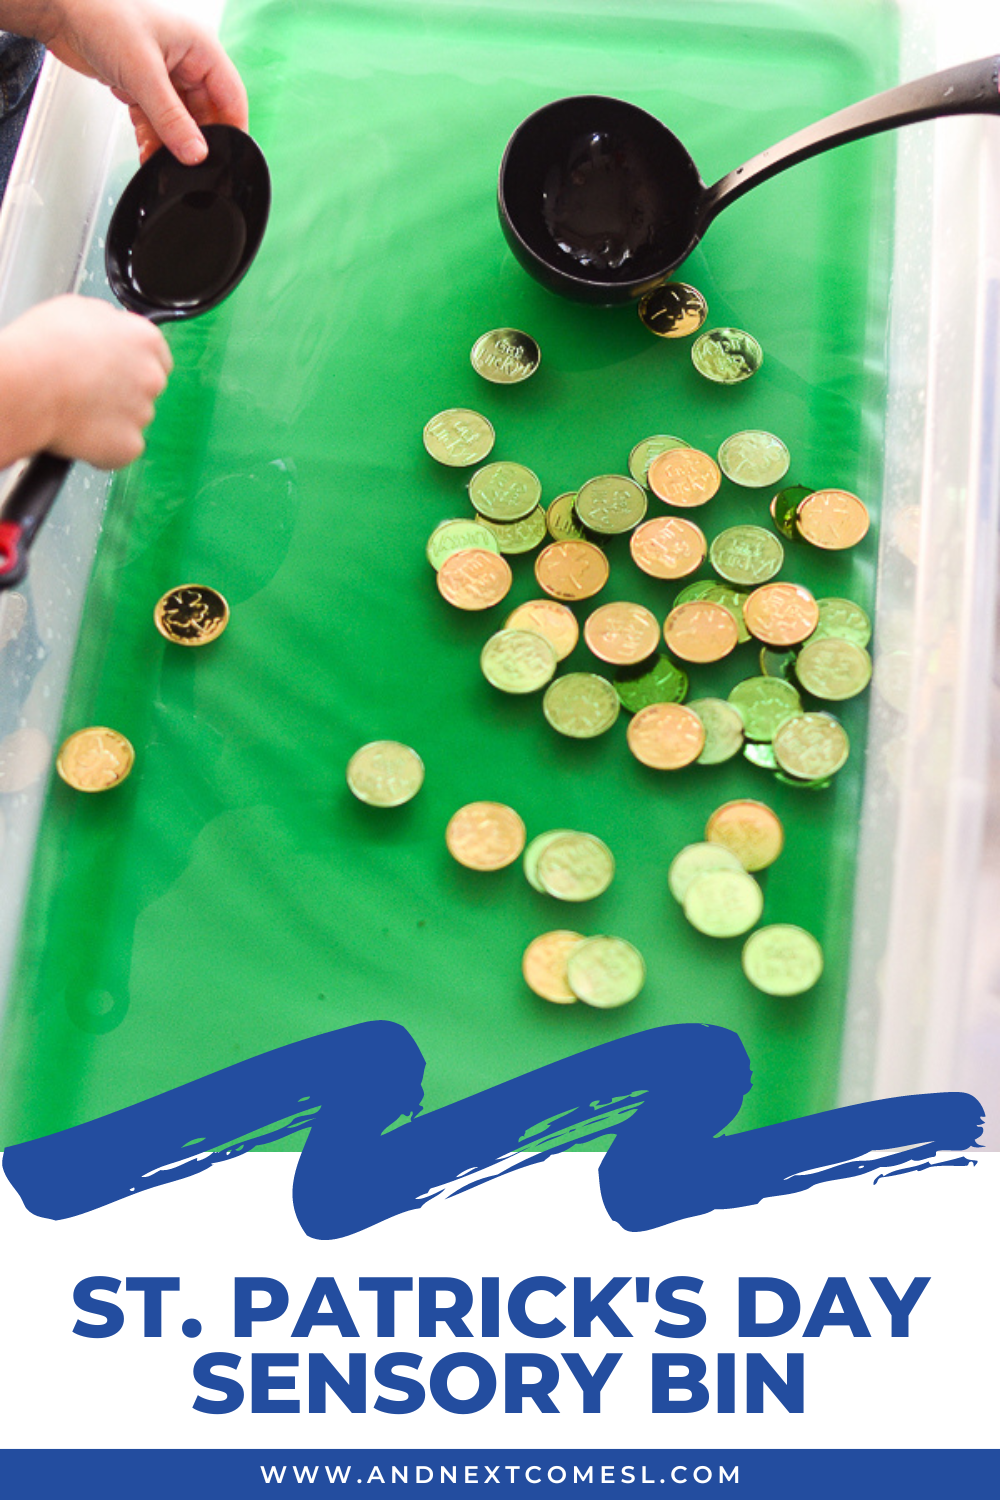 St. Patrick's Day sensory soup bin activity for toddlers and preschoolers